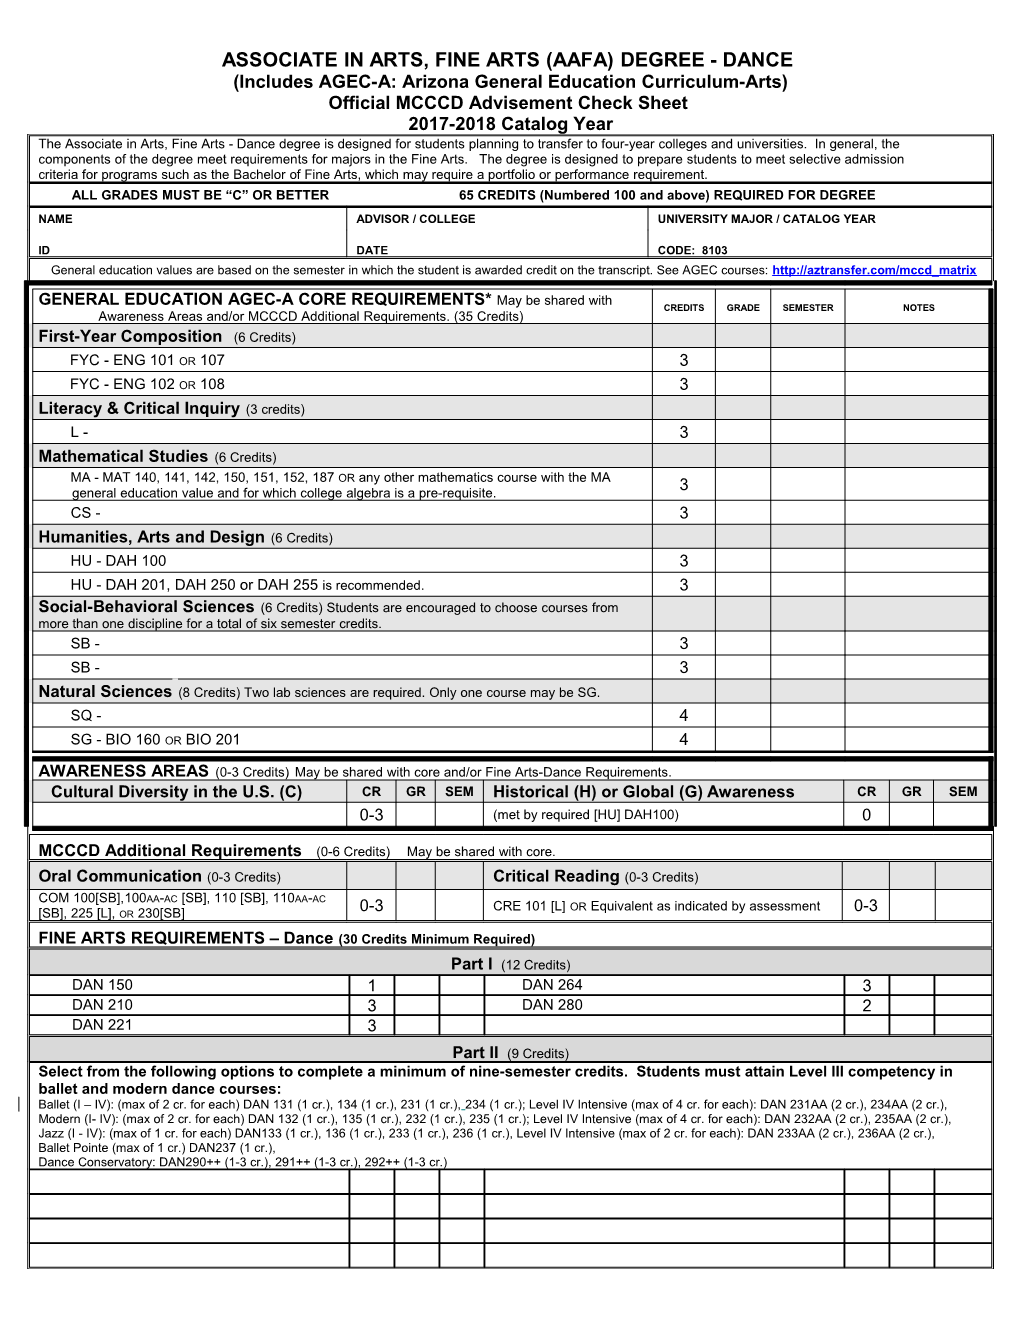 MCCCD Advisement Check Sheet for 2000-2000 Catalog Year s1